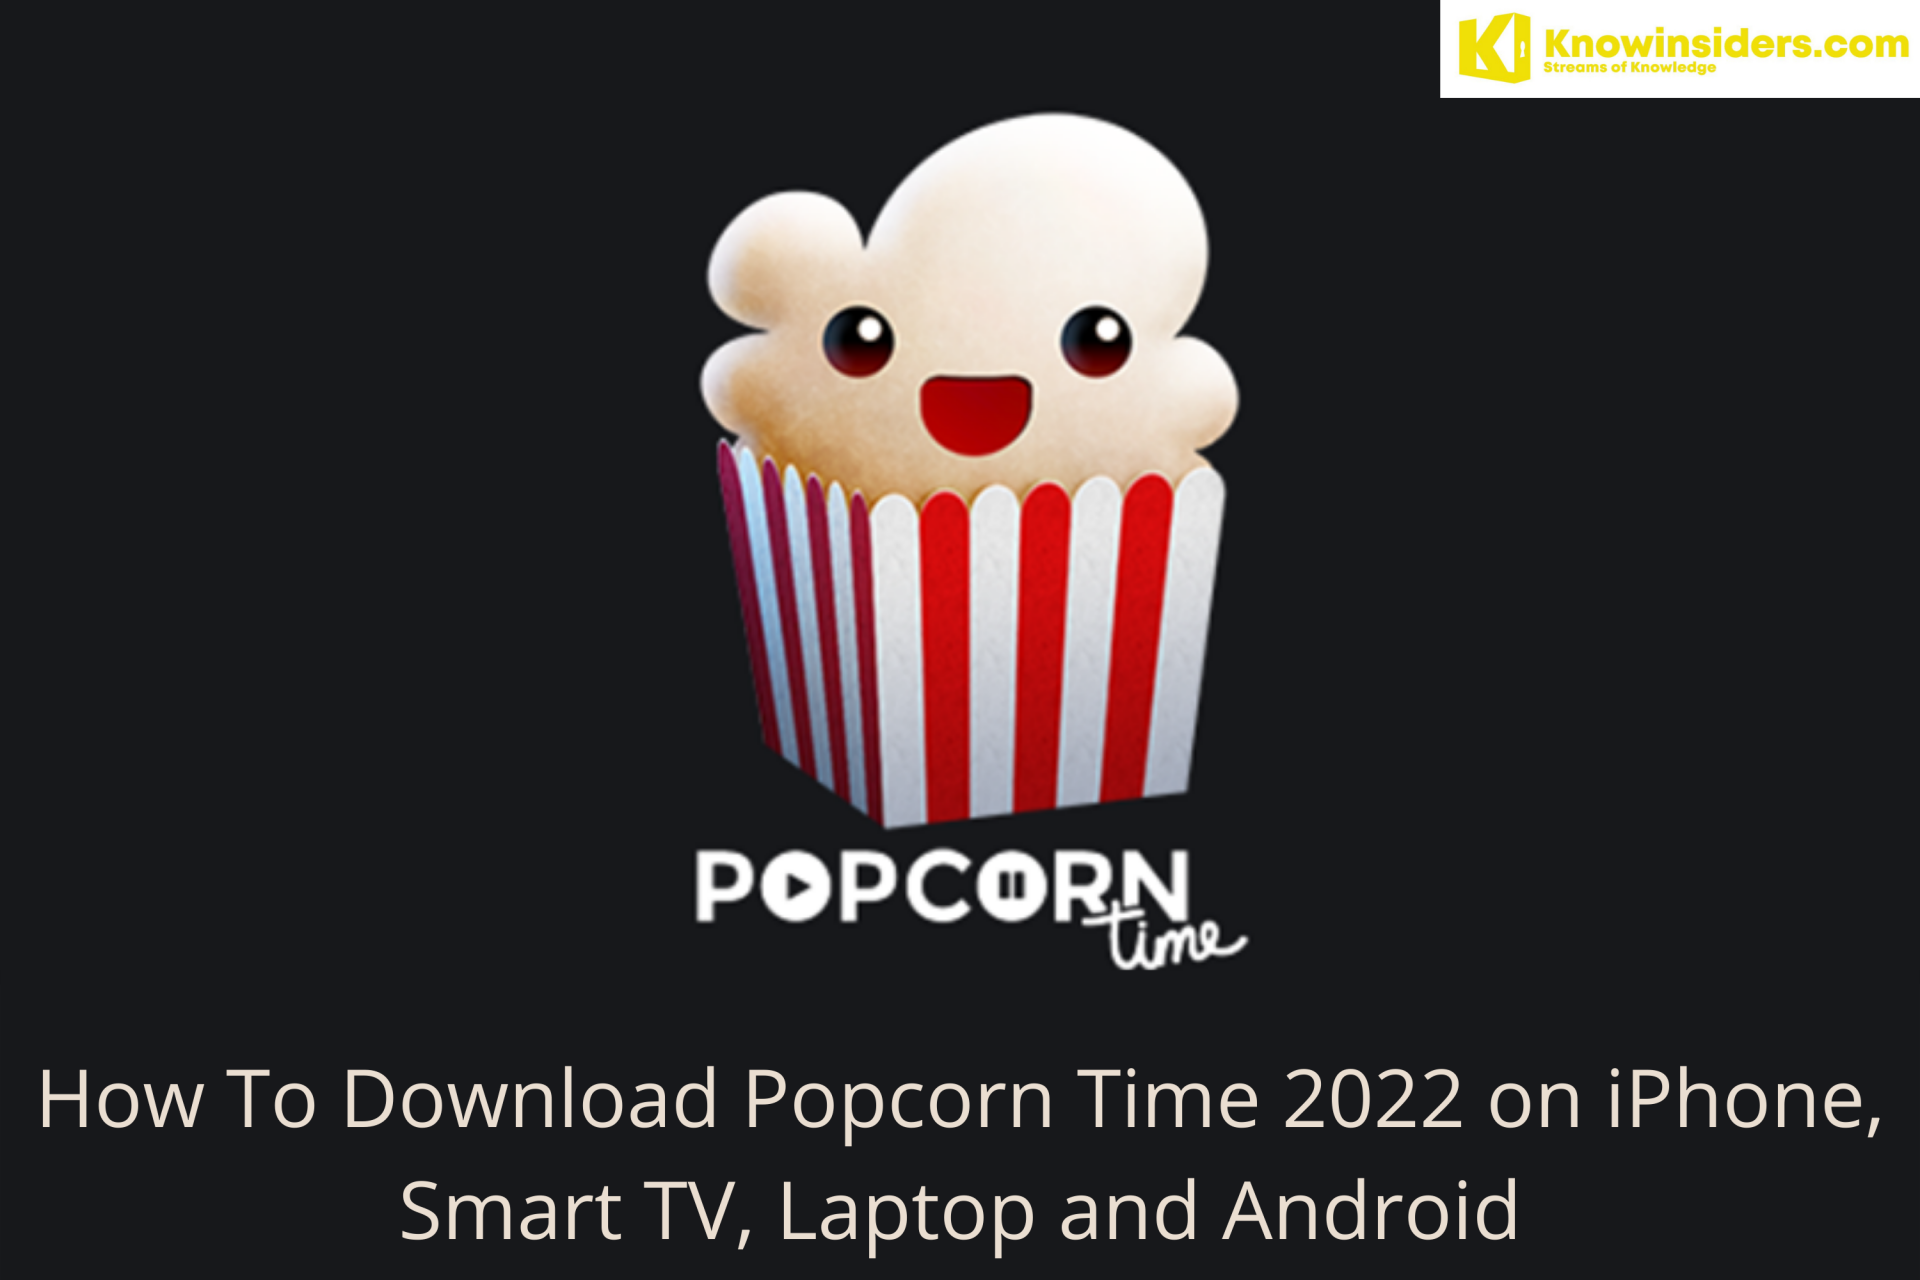 How To Download Popcorn Time 2022 on iPhone, Smart TV, Laptop and Android